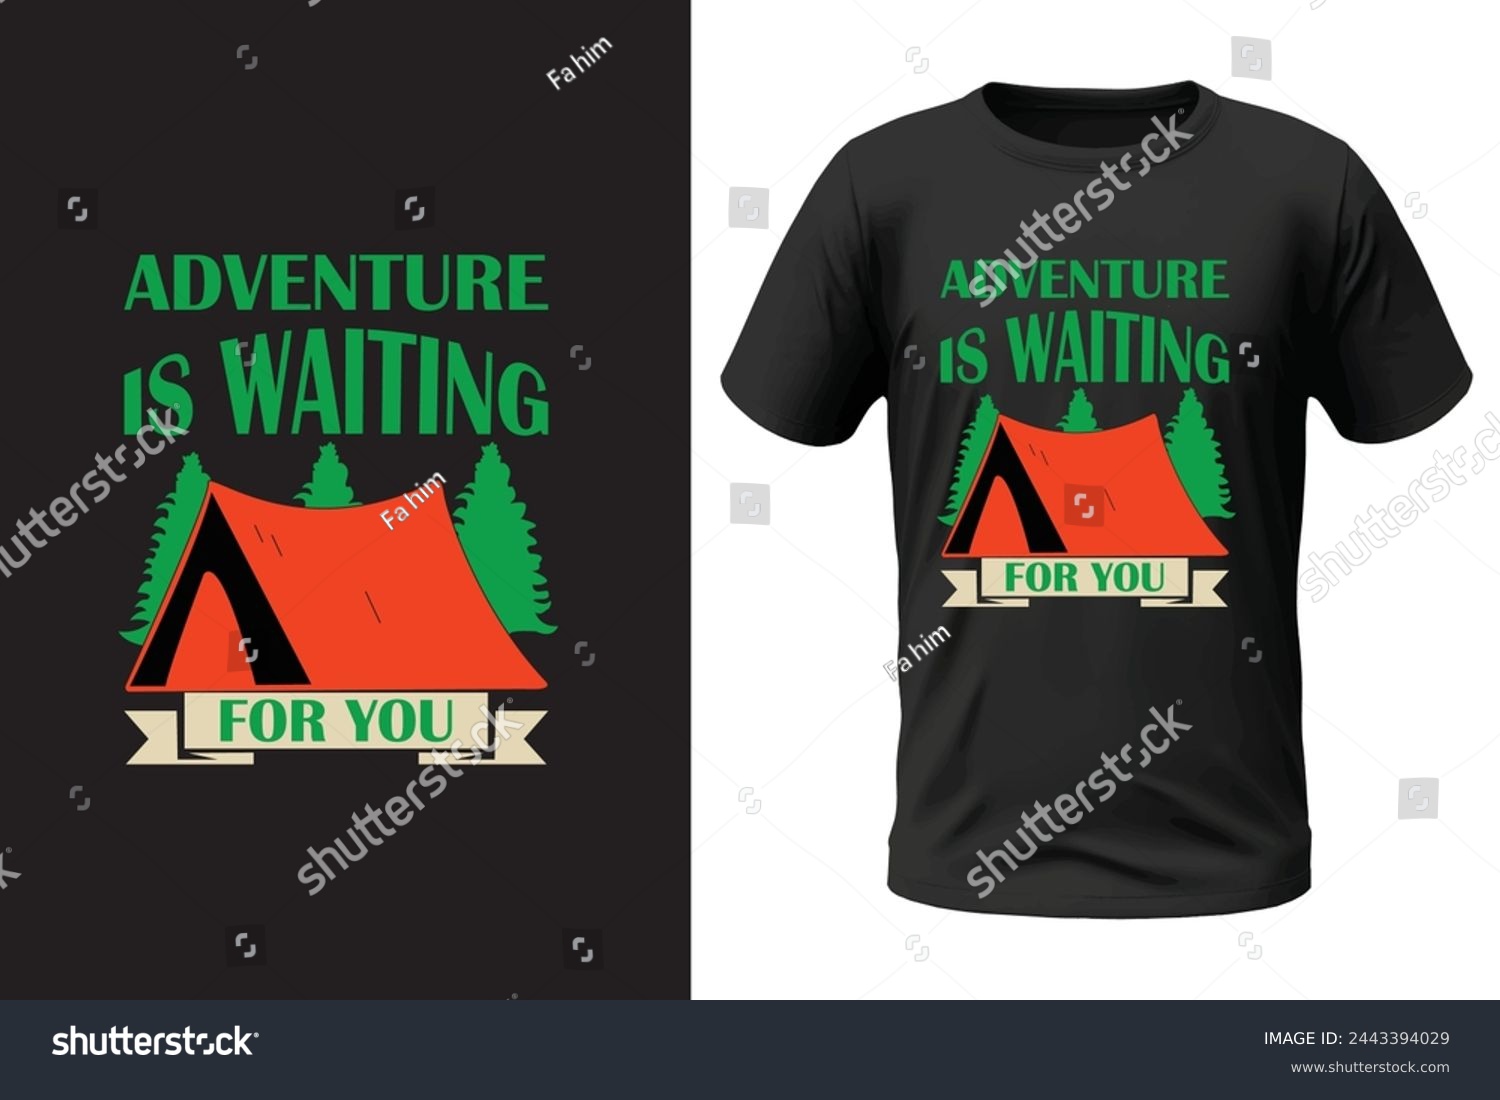 SVG of Camping t-shirt design and vector file svg